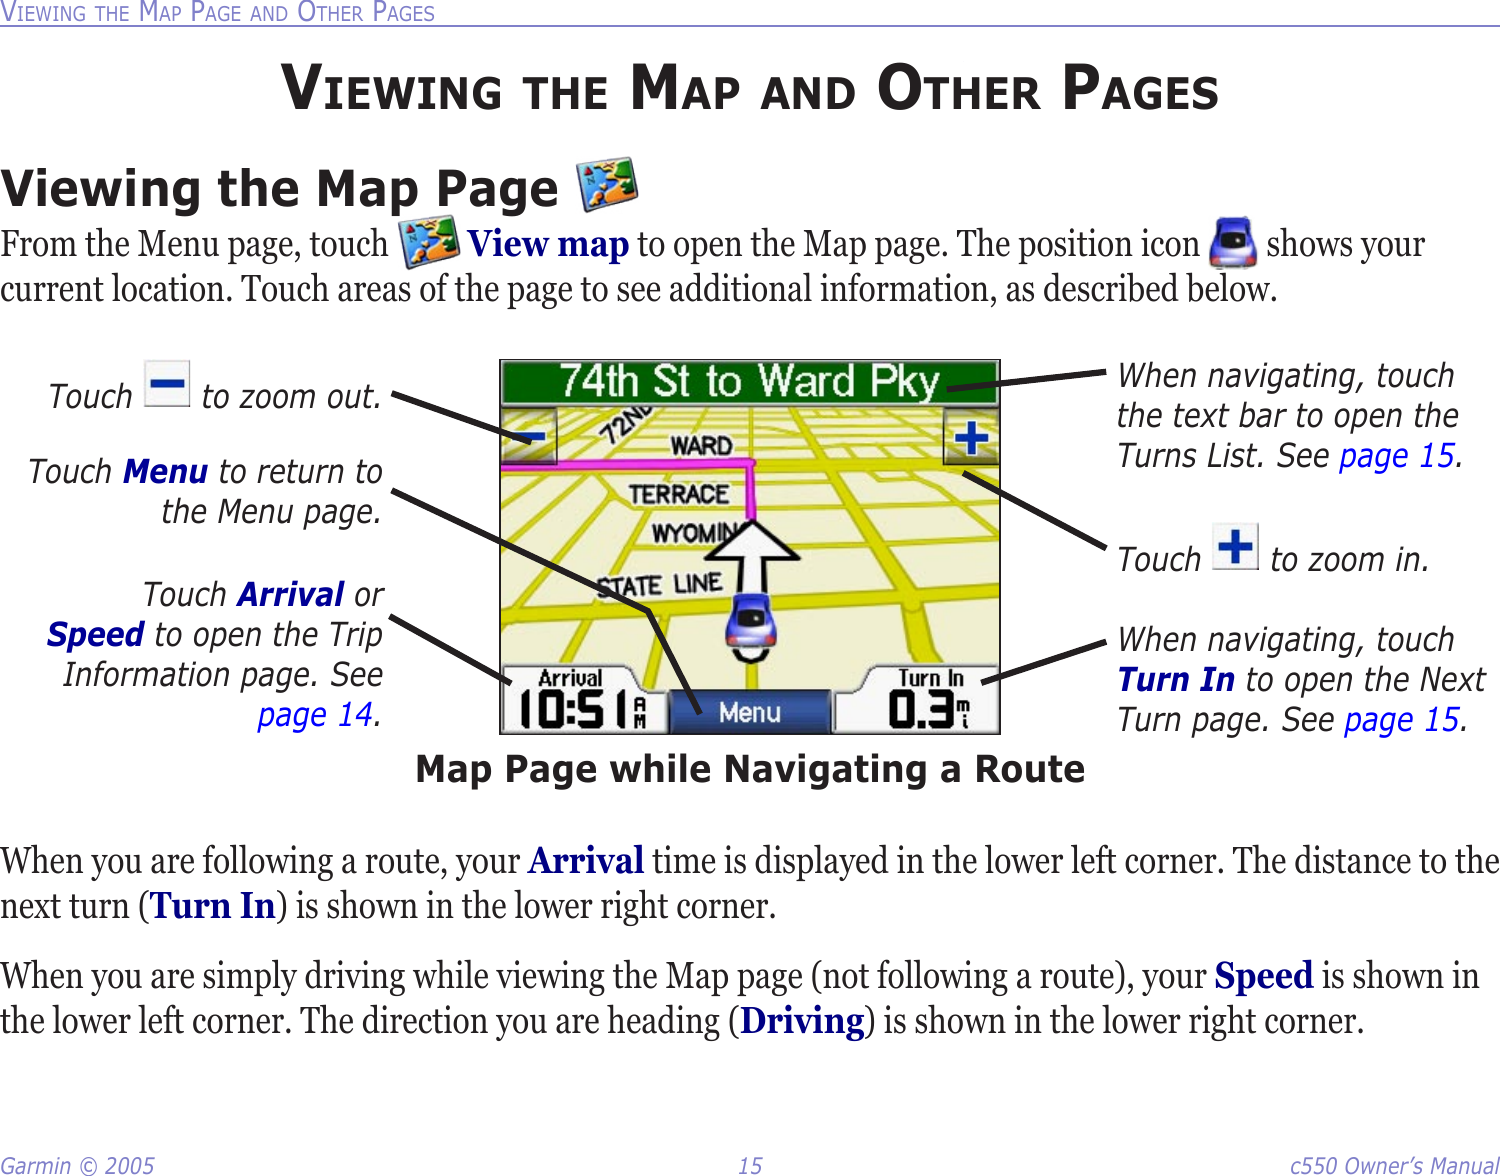 Garmin © 2005  15  c550 Owner’s ManualVIEWING THE MAP PAGE AND OTHER PAGESVIEWING THE MAP AND OTHER PAGESViewing the Map Page From the Menu page, touch   View map to open the Map page. The position icon   shows your current location. Touch areas of the page to see additional information, as described below.Touch Arrival or Speed to open the Trip Information page. See page 14.Map Page while Navigating a RouteWhen navigating, touch Turn In to open the Next Turn page. See page 15.When navigating, touch the text bar to open the Turns List. See page 15.Touch   to zoom out.Touch   to zoom in.Touch Menu to return to the Menu page.When you are following a route, your Arrival time is displayed in the lower left corner. The distance to the next turn (Turn In) is shown in the lower right corner. When you are simply driving while viewing the Map page (not following a route), your Speed is shown in the lower left corner. The direction you are heading (Driving) is shown in the lower right corner. 